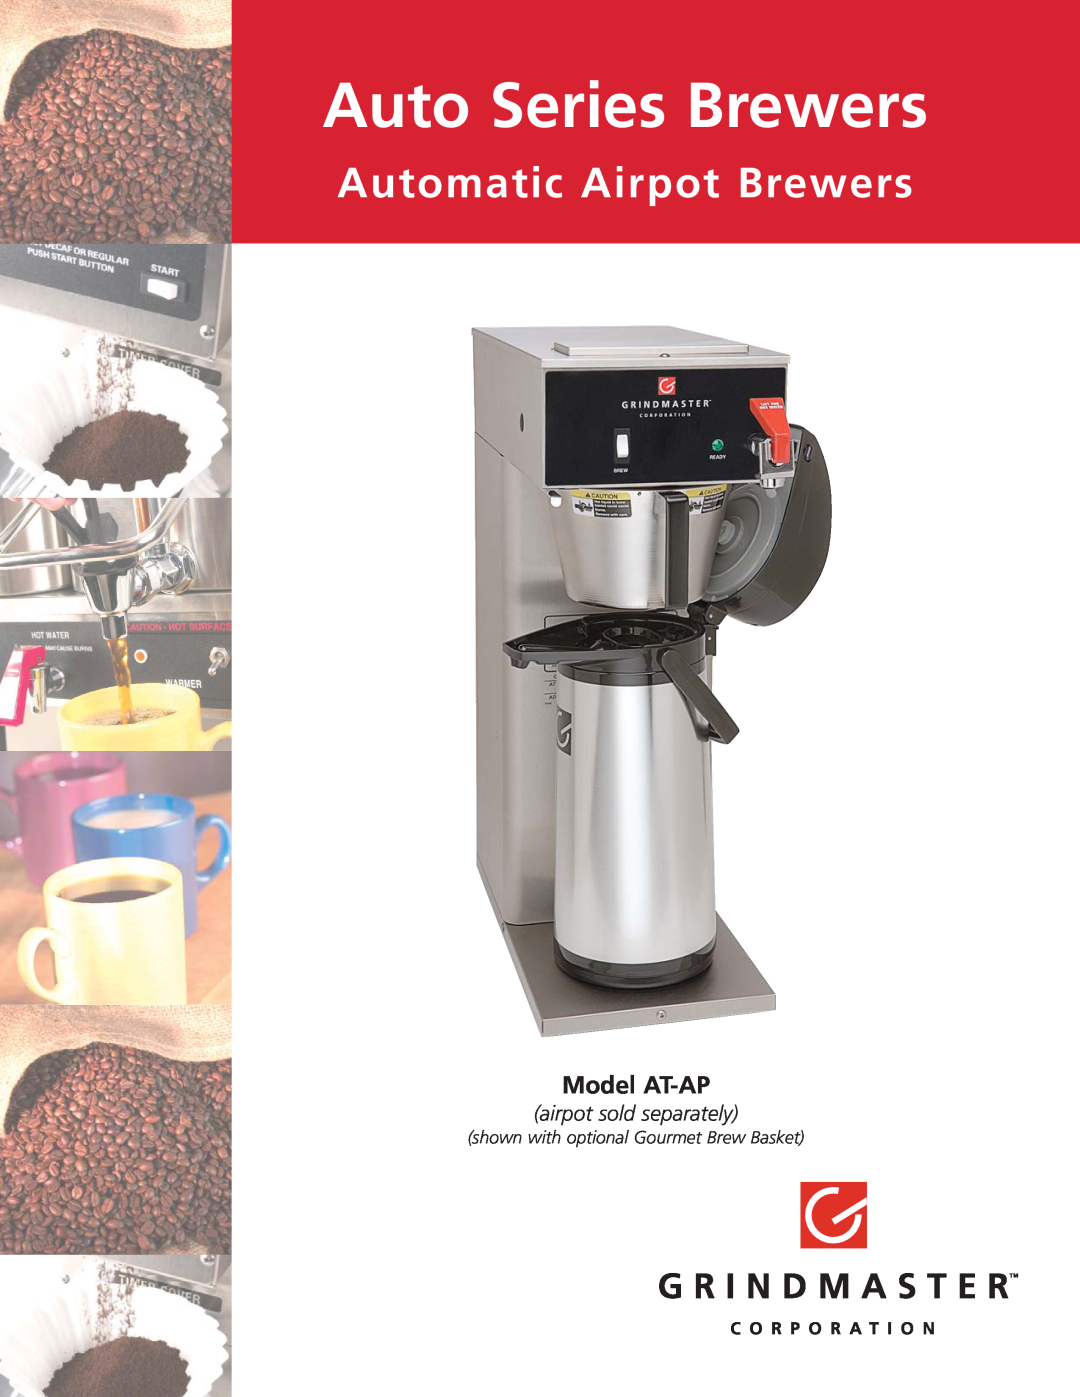 Grindmaster manual Auto Series Brewers, Automatic Airpot Brewers, Model AT-AP, airpot sold separately 